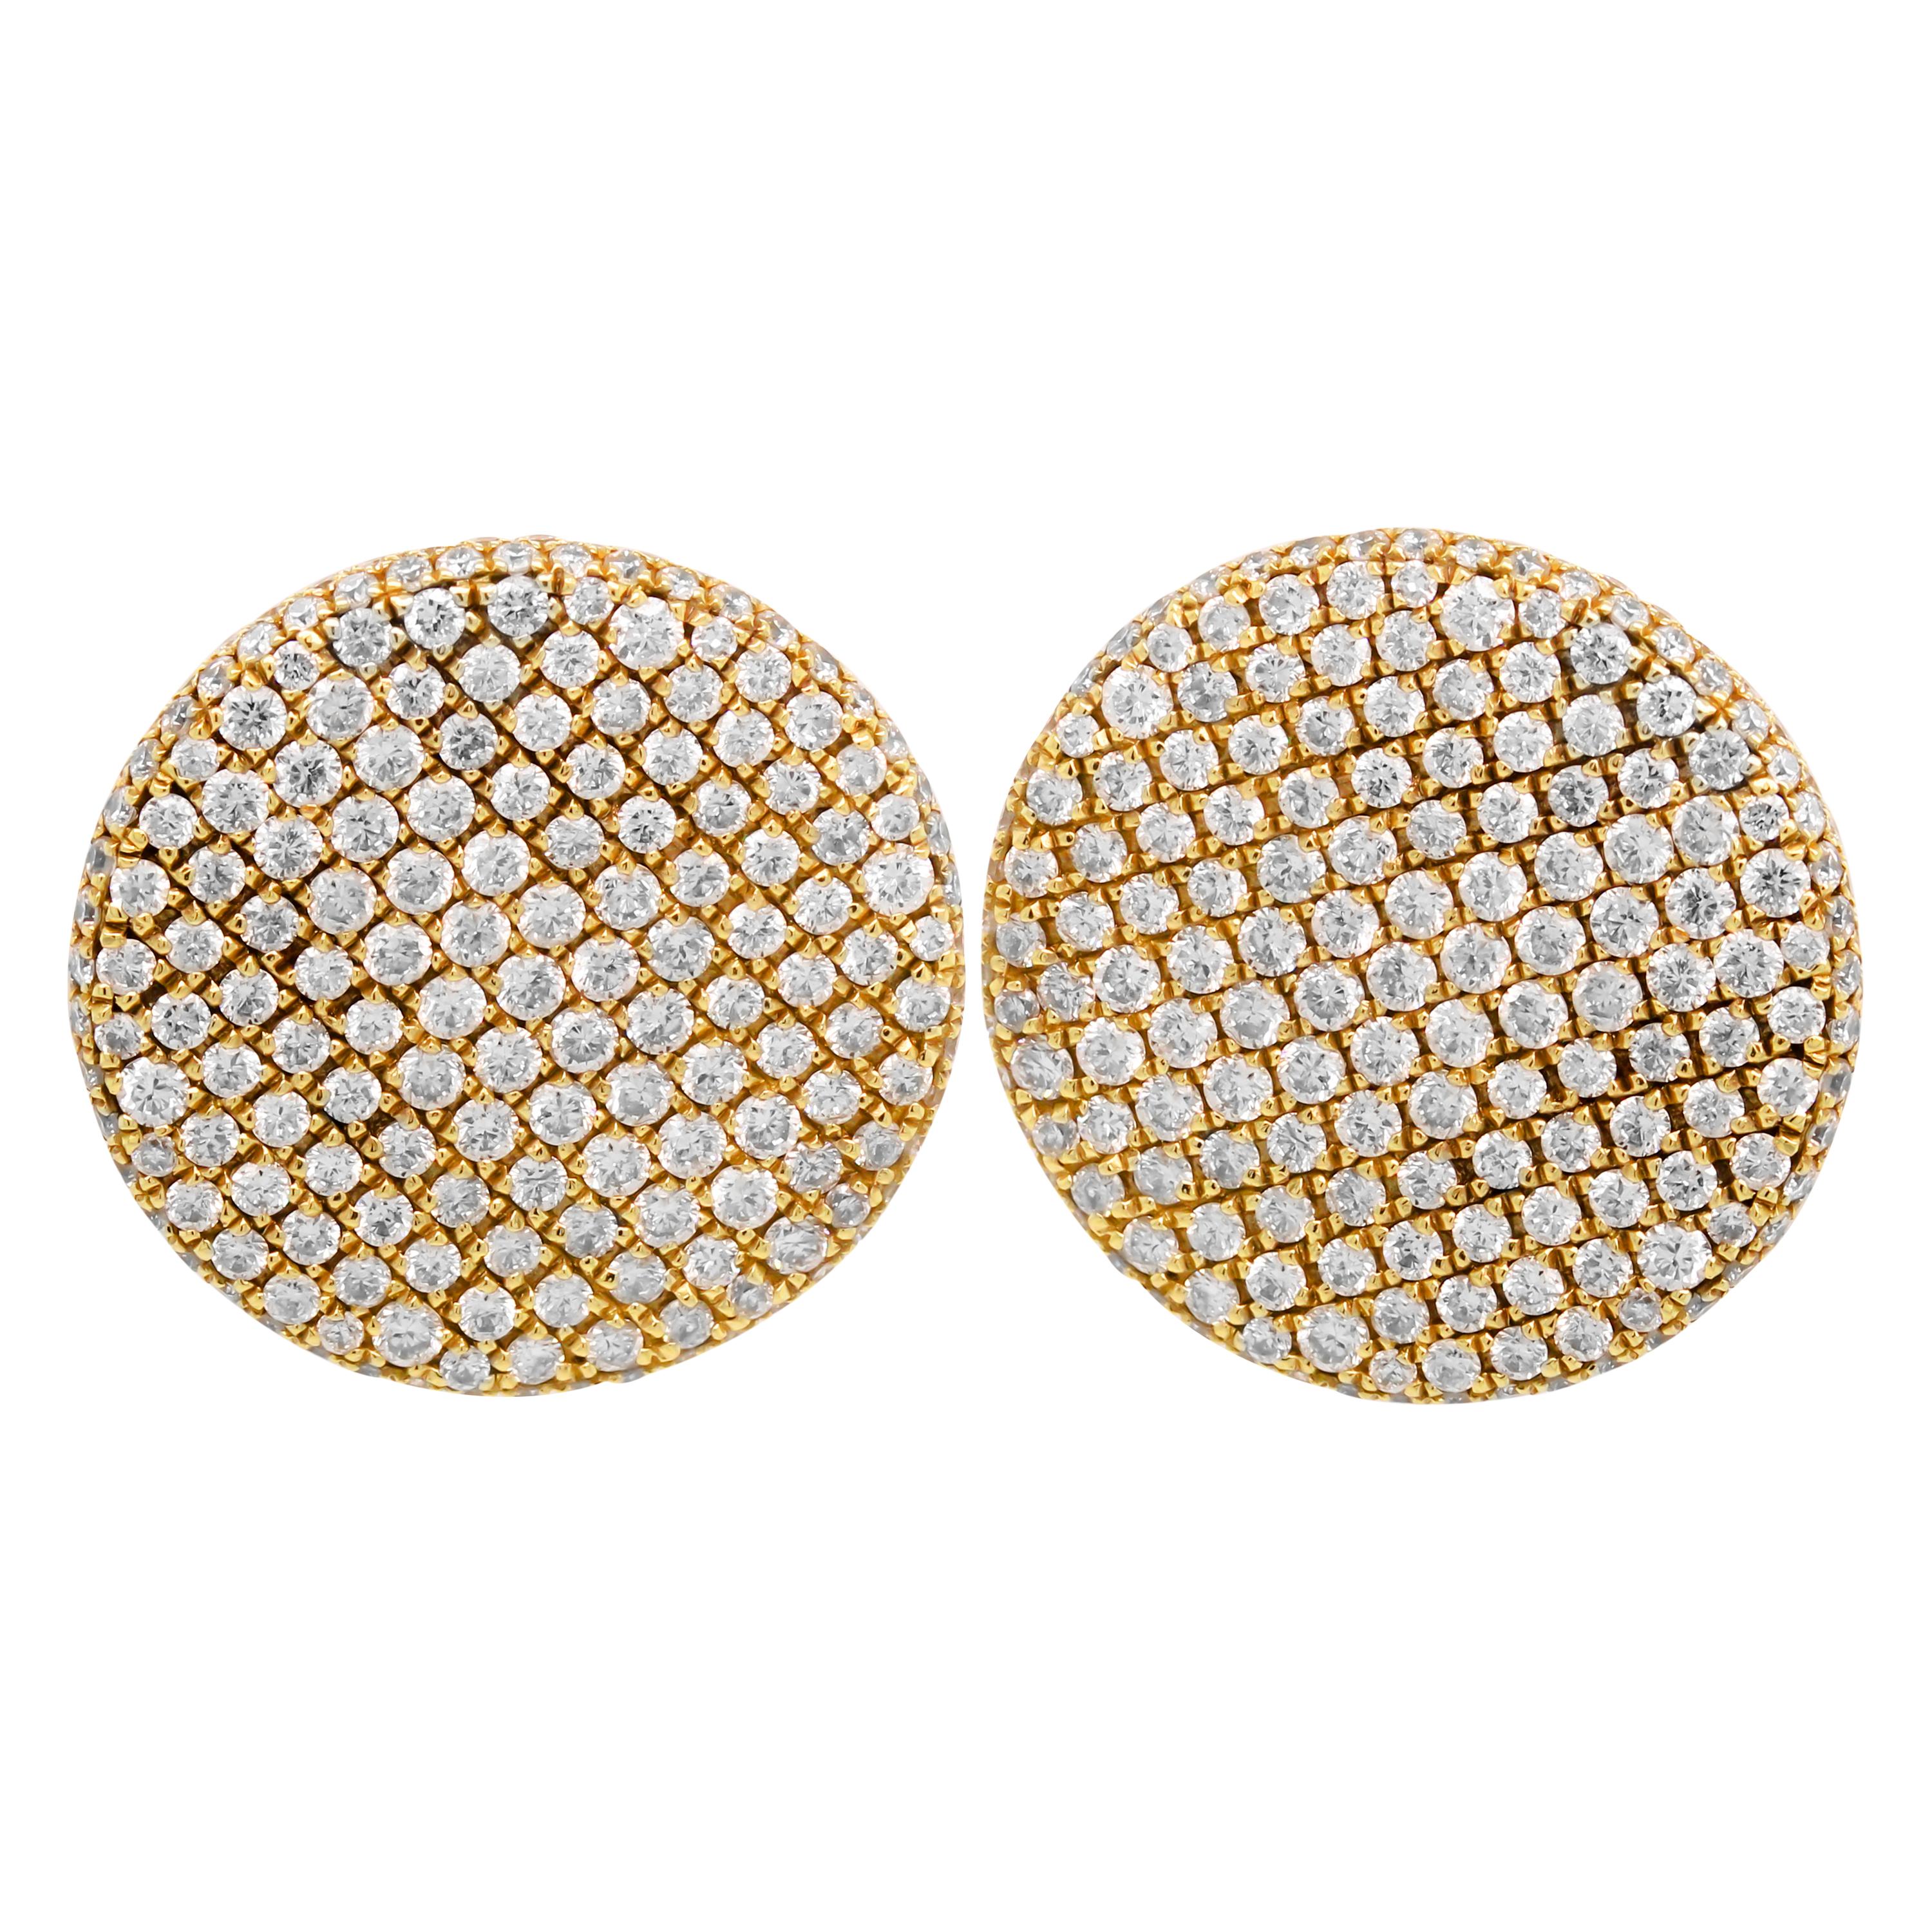 18 Karat Yellow Gold and Pave Set Diamond Circle Disk Stud Earrings In Excellent Condition For Sale In Boca Raton, FL